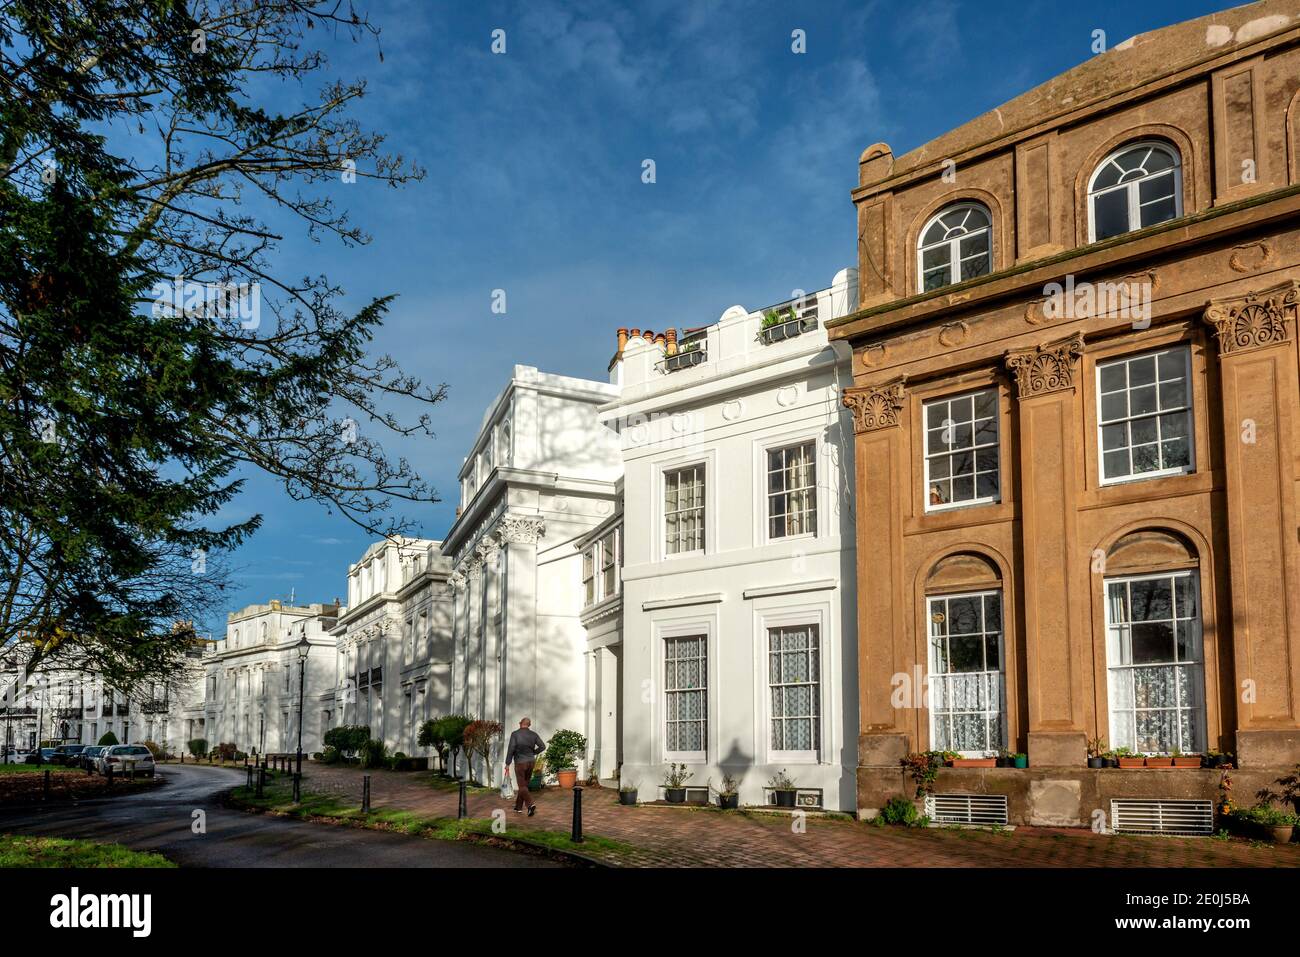 Worthing, 11 dicembre 2020: Park Crescent a Worthing Foto Stock